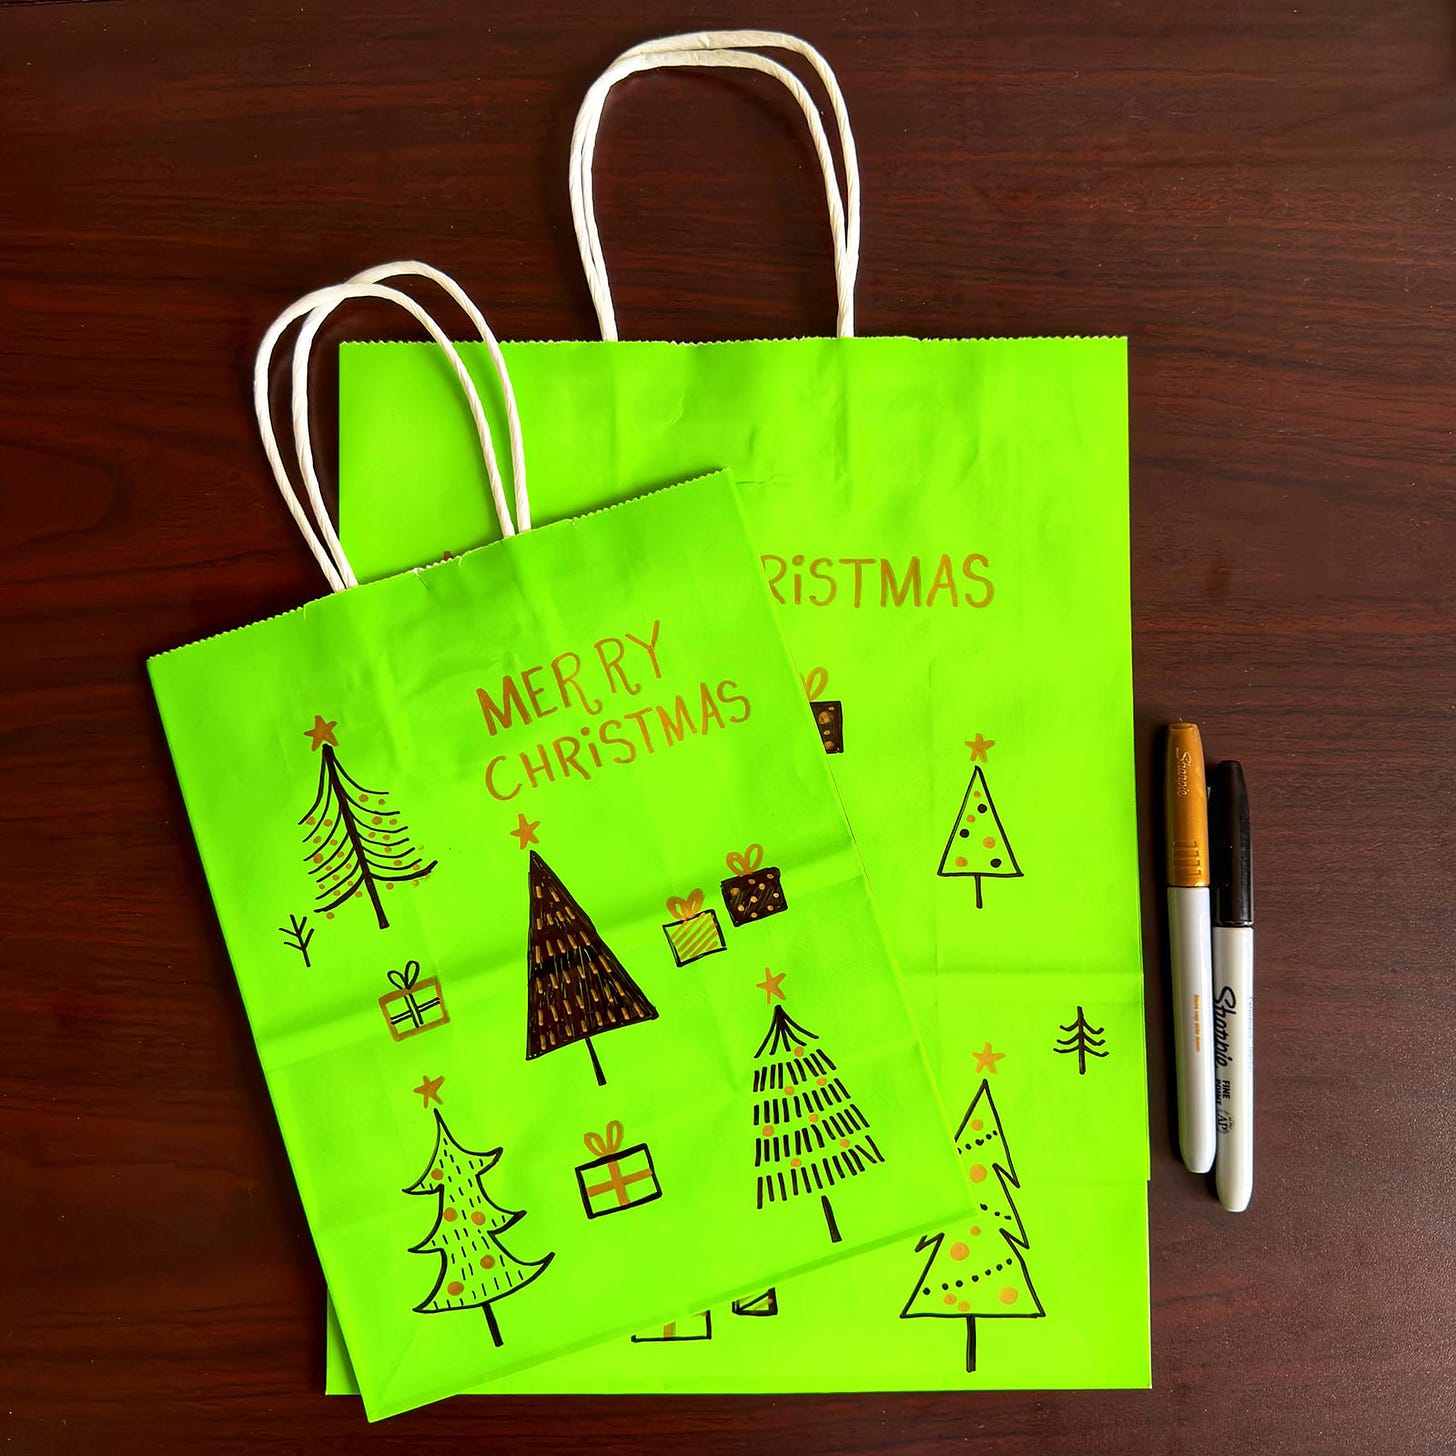 Gift bags with hand-drawn Christmas trees on them.